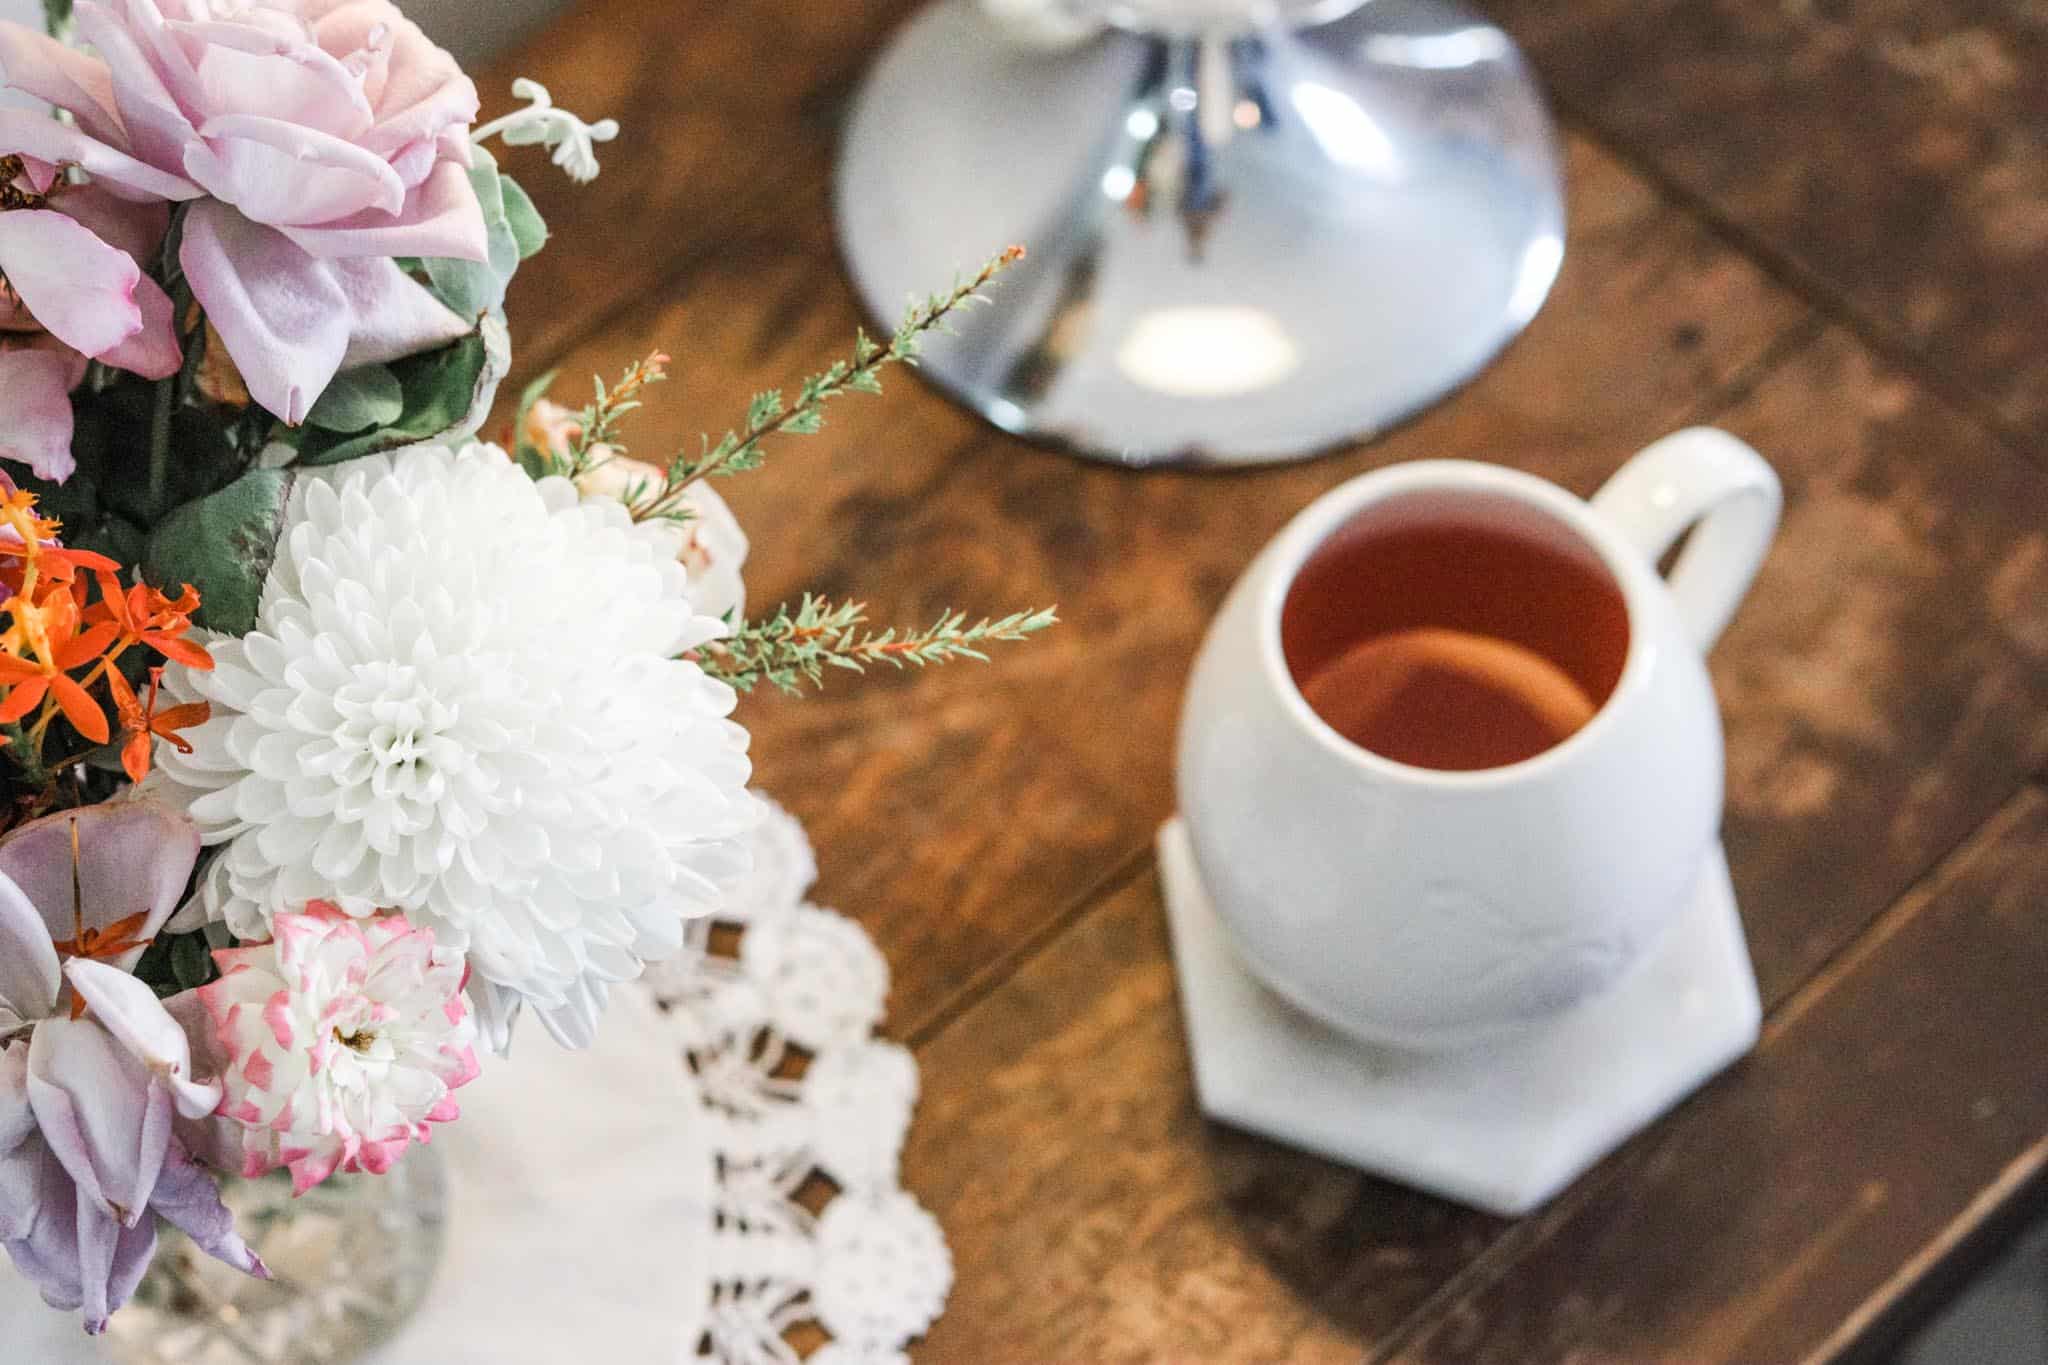 Overhead image of a cup of tea set on a table upon a marble coaster next to a vase of flowers